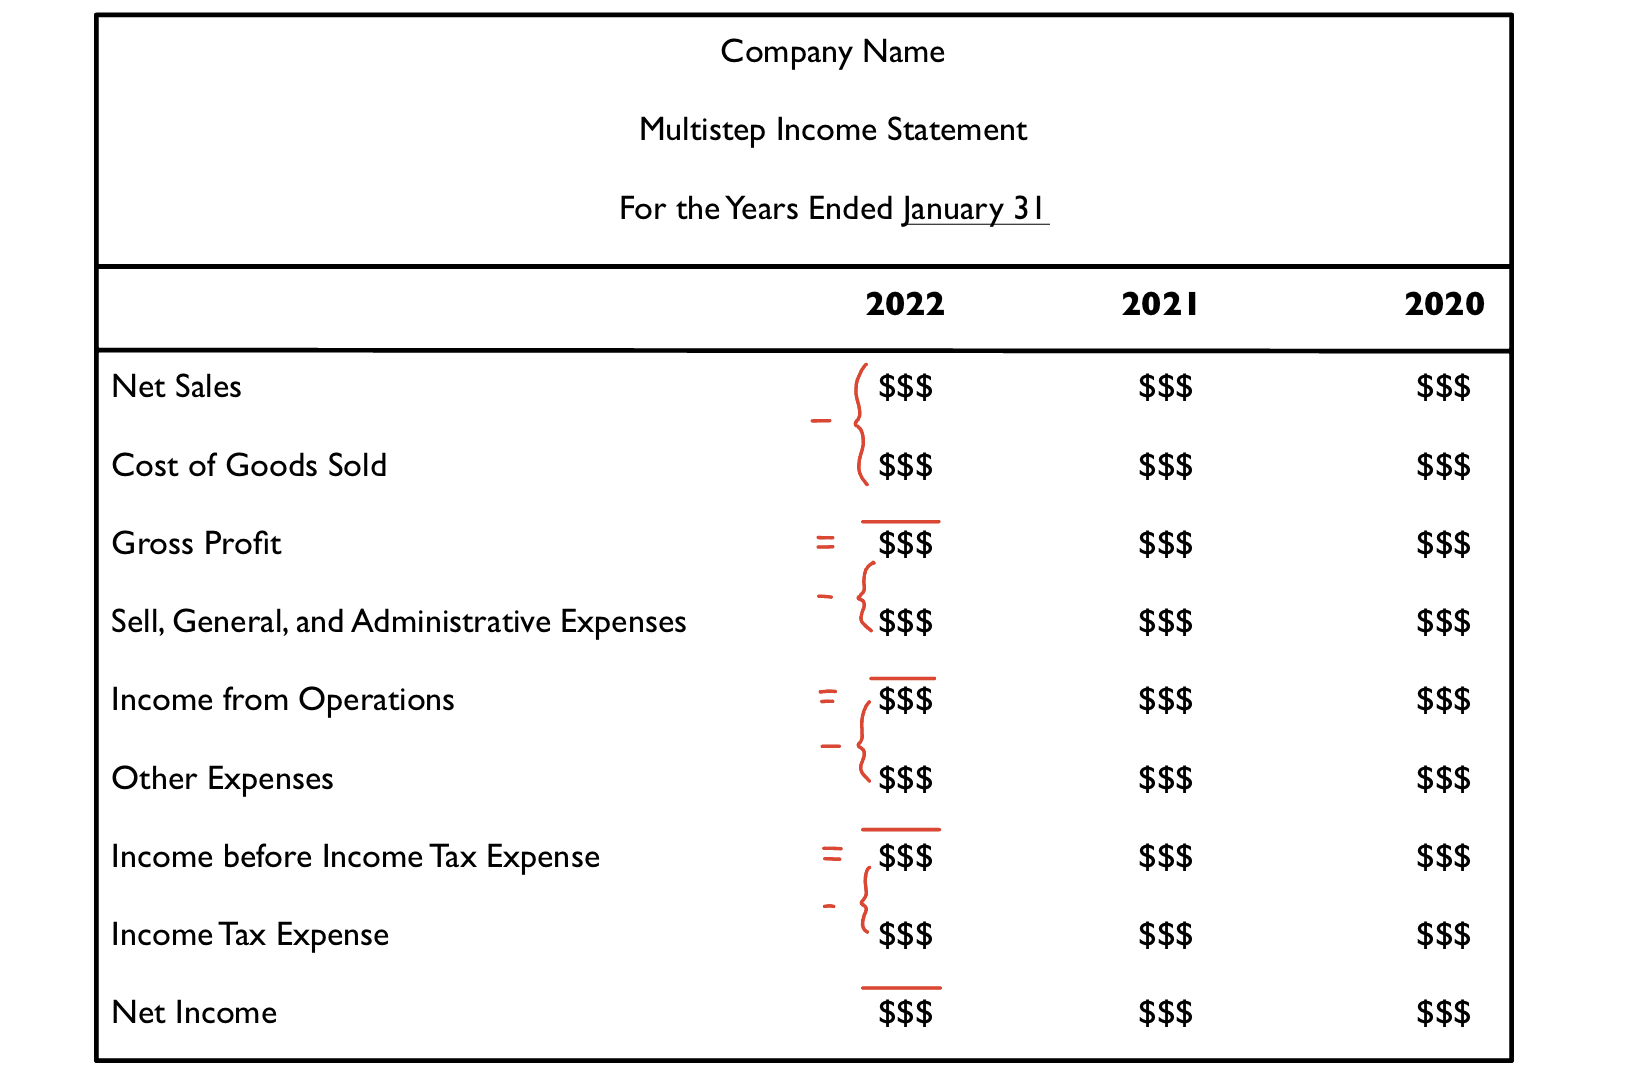 The format of a Multistep Income Statement. Income Tax is always the last expense listed.